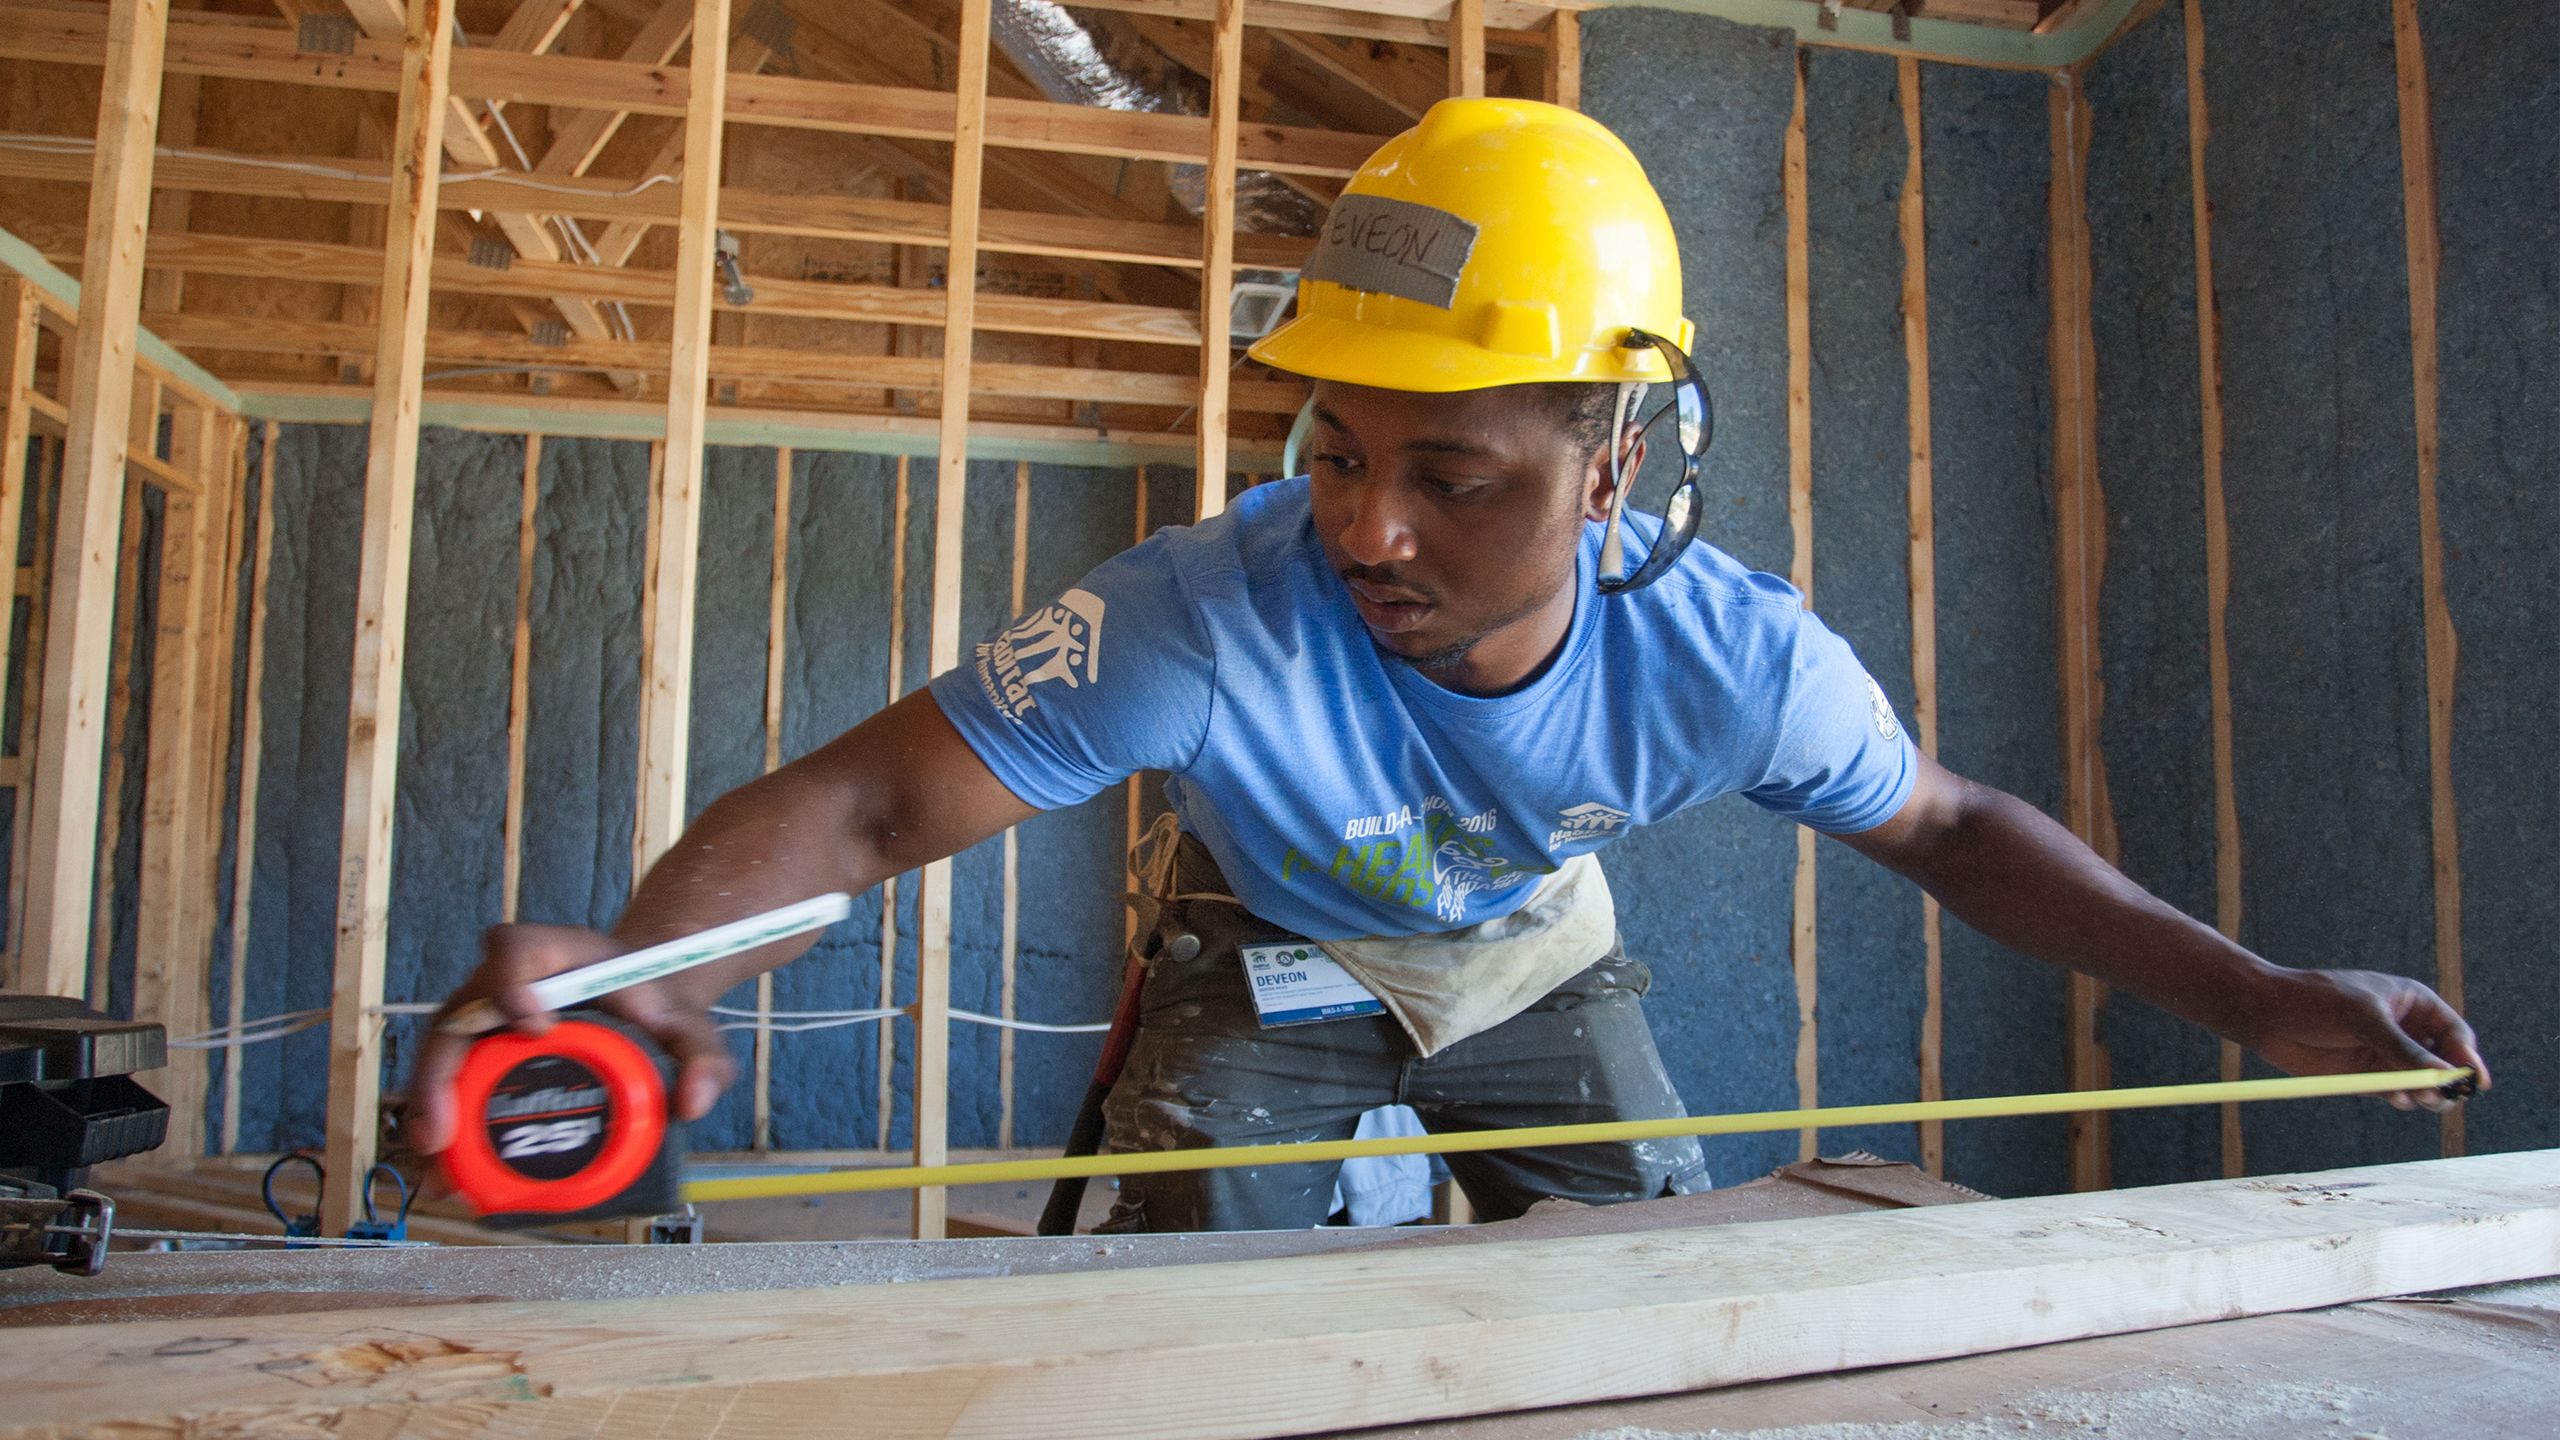 An AmeriCorps member concentrates as he measures a piece of lumber with a measuring tape.